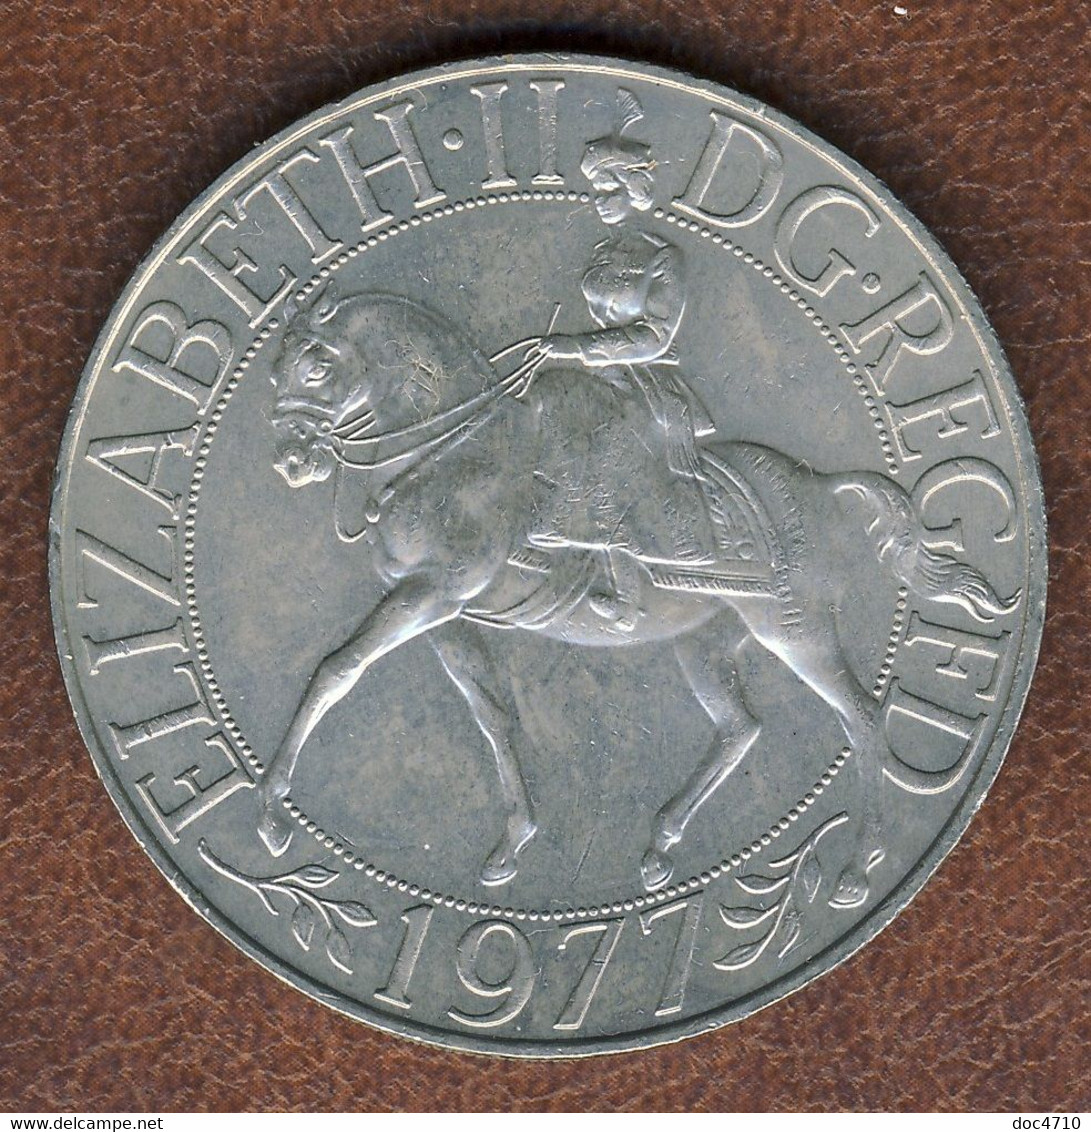 Great Britain 25 New Pence 1977, Silver Jubilee Of Reign, KM#920, XF - 50 Pence